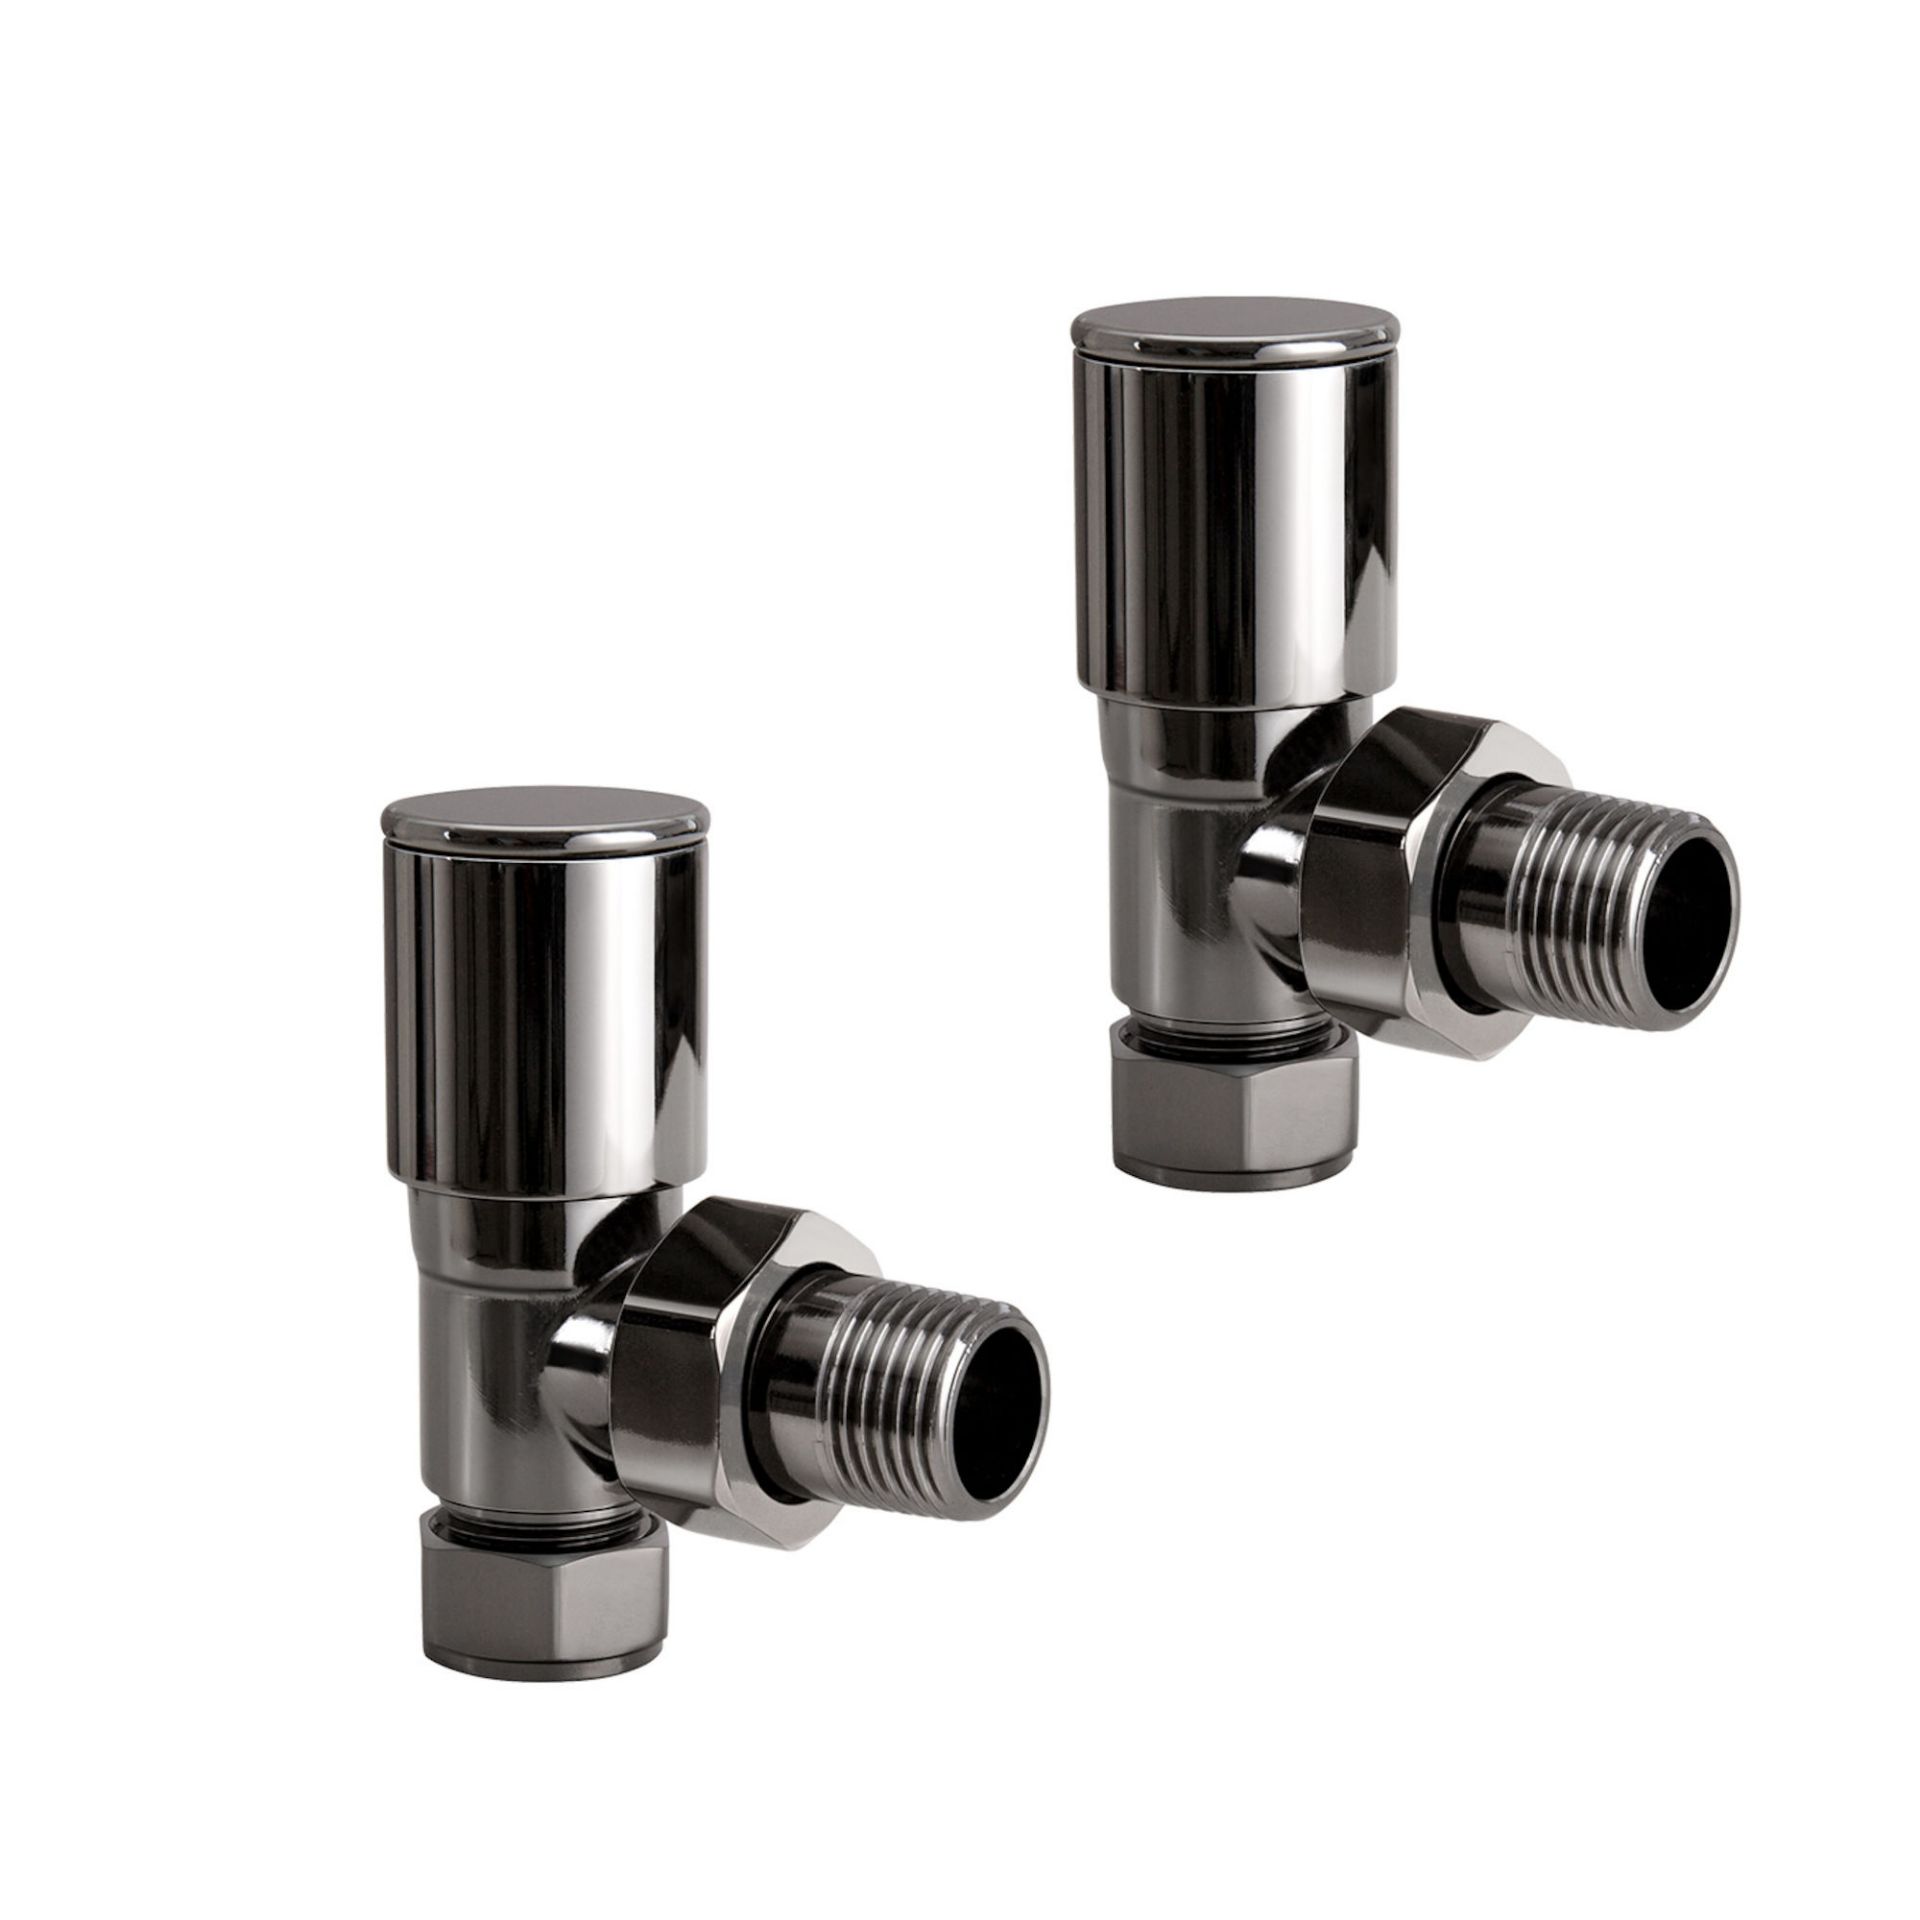 (R1034) Standard Connection Angled Radiator Valve in Black Nickel - 15mm Structured with flexibility